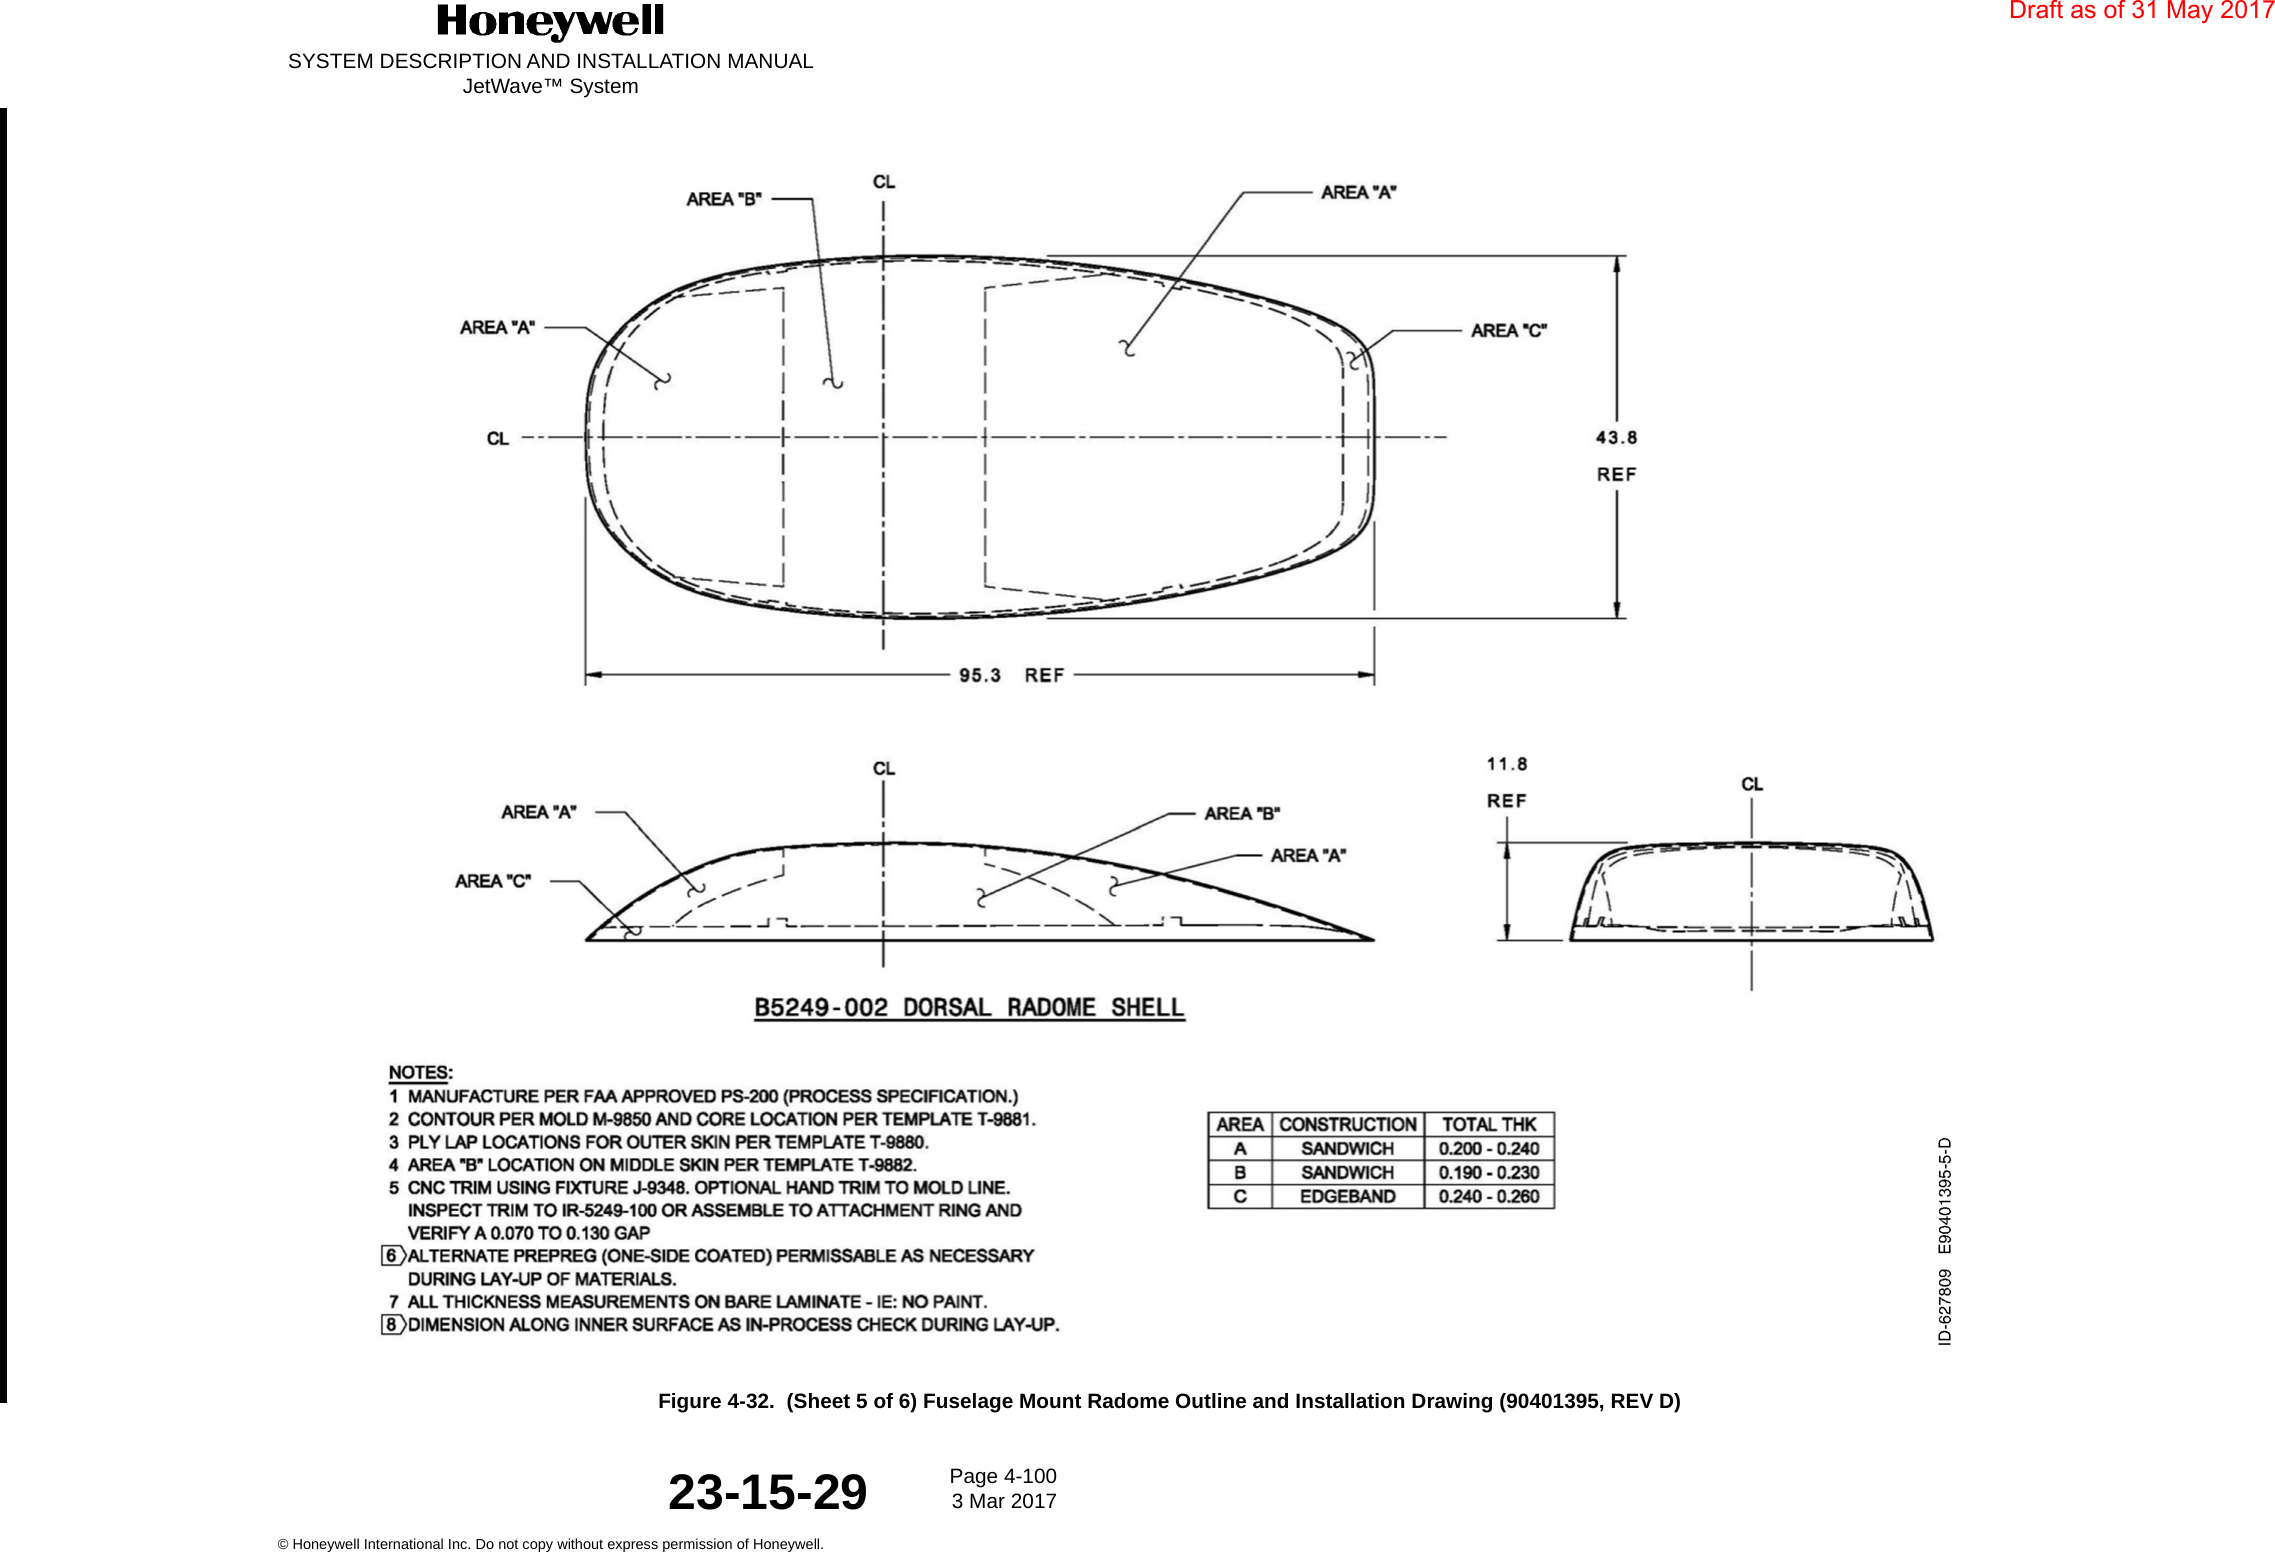 SYSTEM DESCRIPTION AND INSTALLATION MANUALJetWave™ SystemPage 4-100 3 Mar 2017© Honeywell International Inc. Do not copy without express permission of Honeywell.23-15-29Figure 4-32.  (Sheet 5 of 6) Fuselage Mount Radome Outline and Installation Drawing (90401395, REV D)Draft as of 31 May 2017